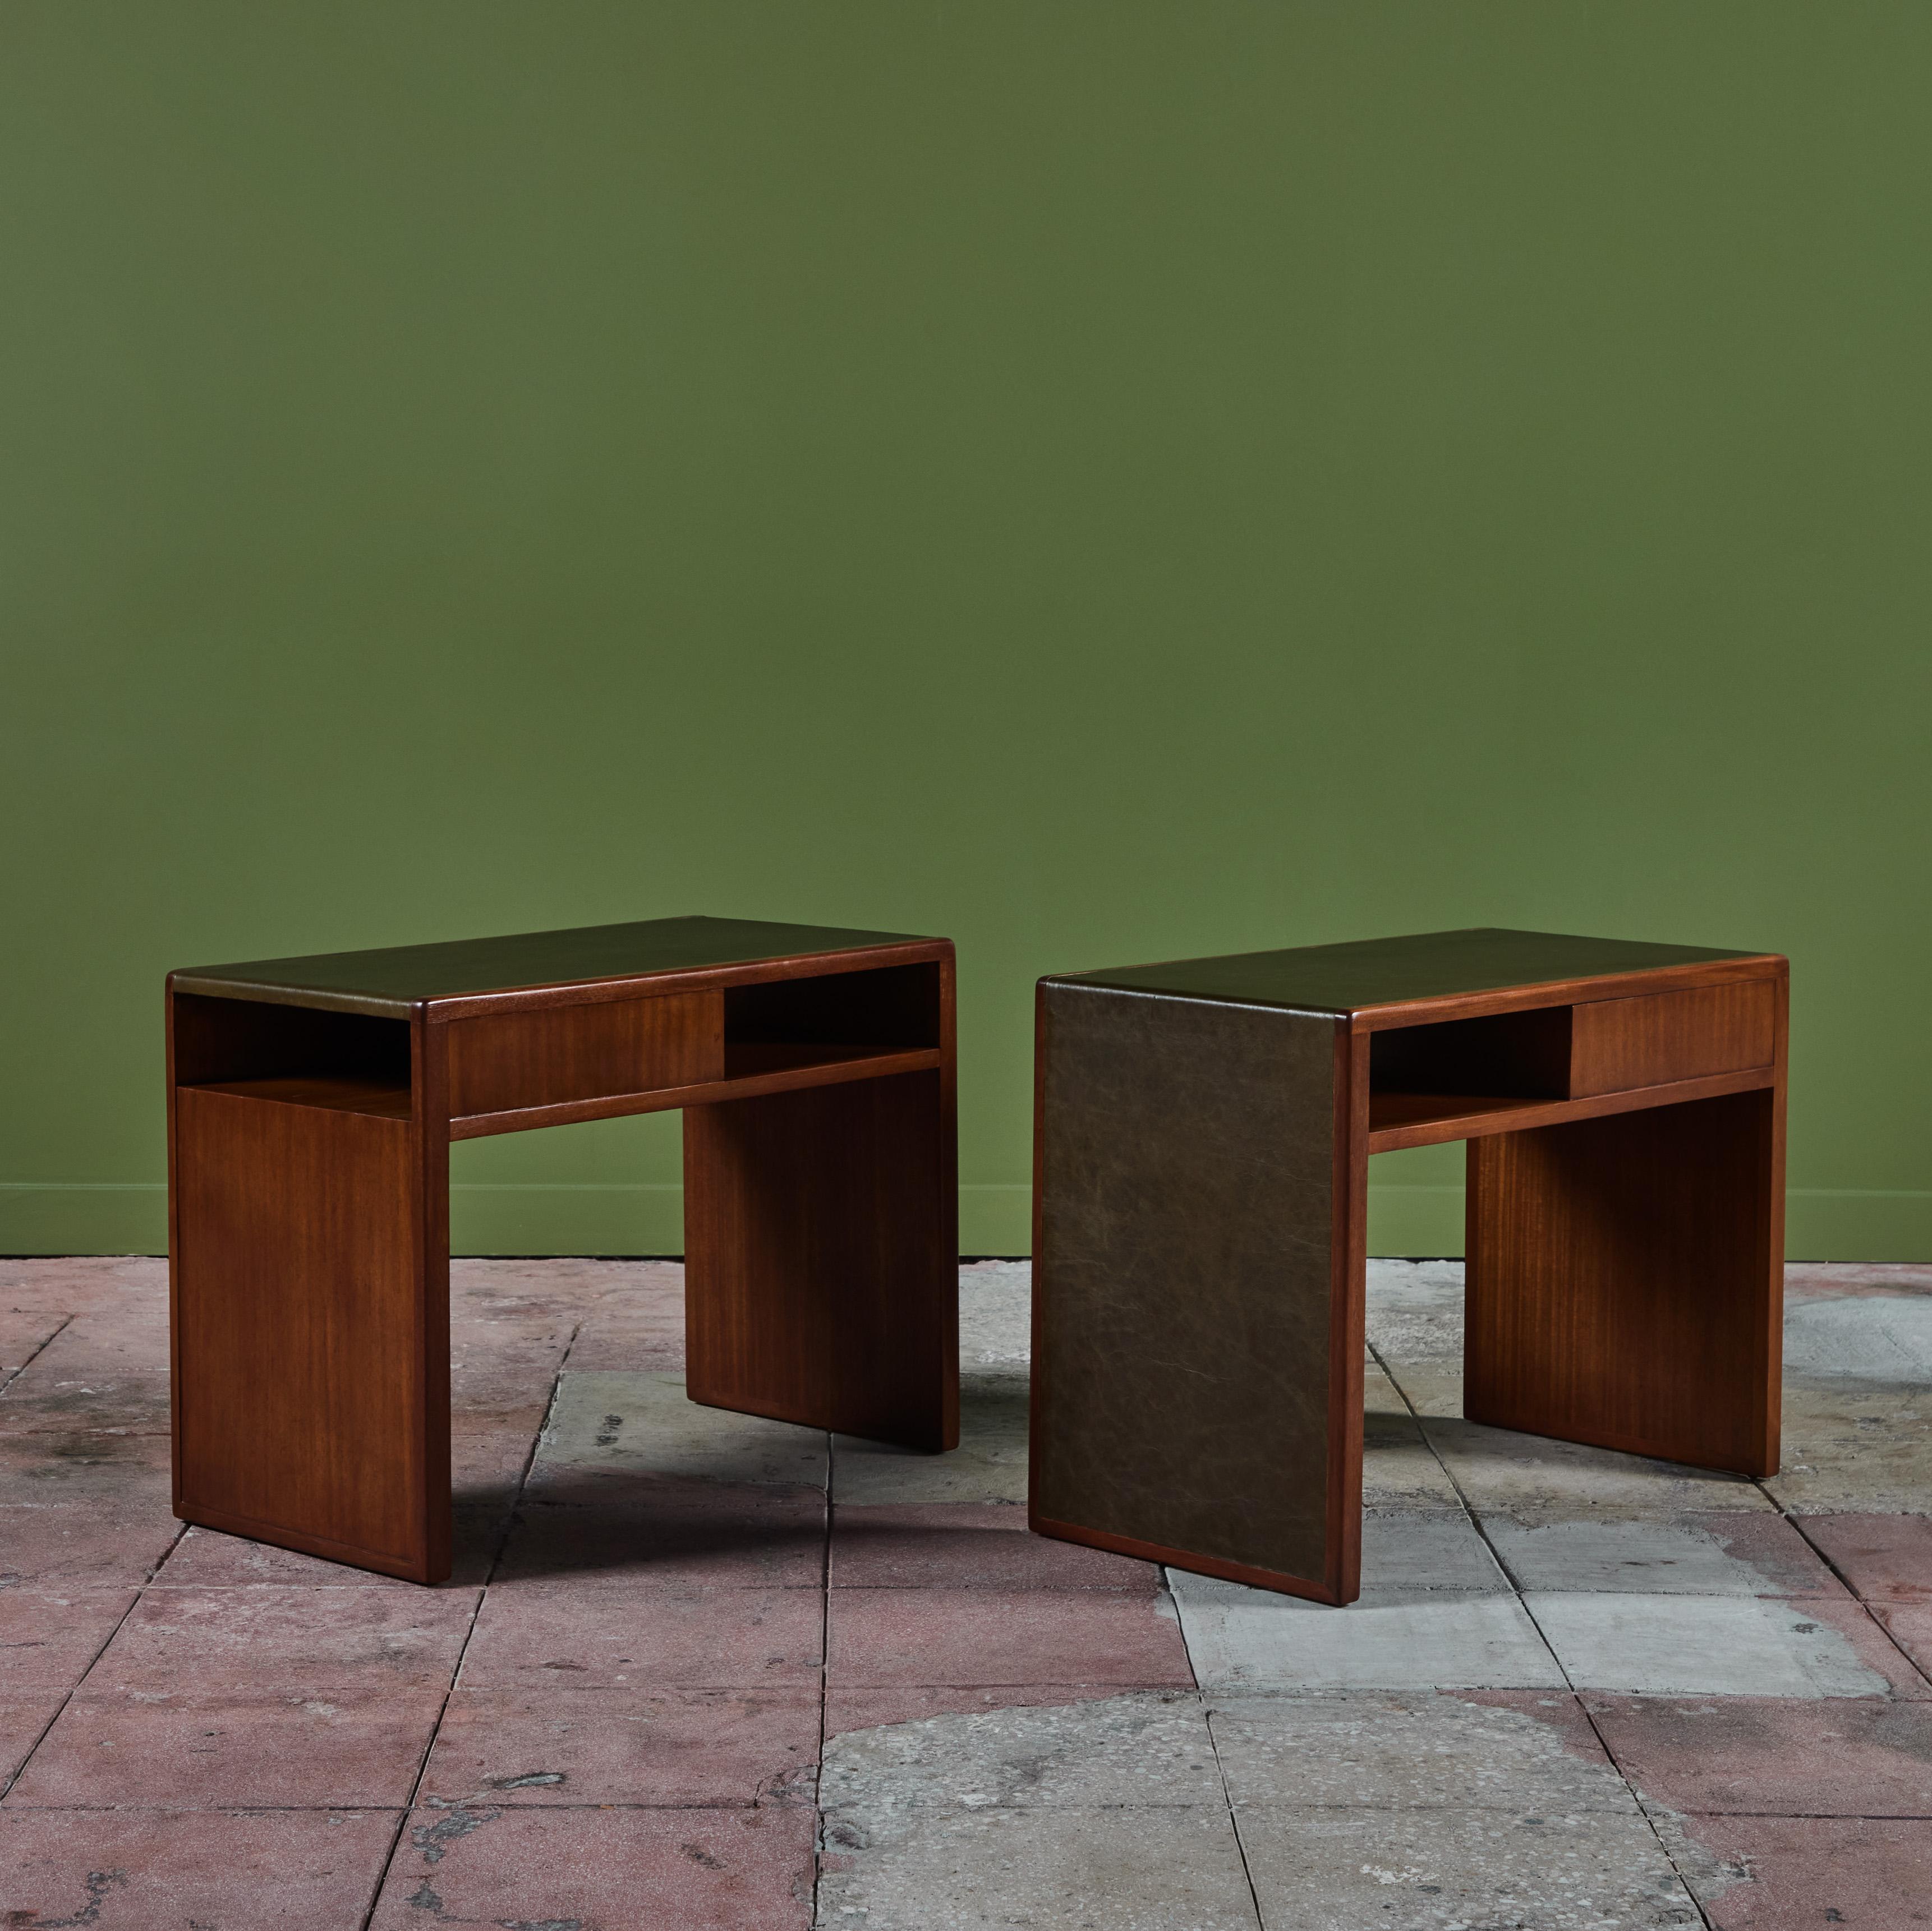 Pair of Edward Wormley Side Tables for Dunbar, c.1940, USA. The tables feature a mahogany waterfall style body with olive green leather table top that cascades down one side of each table. Each table has two petite shelves, one on the longer side